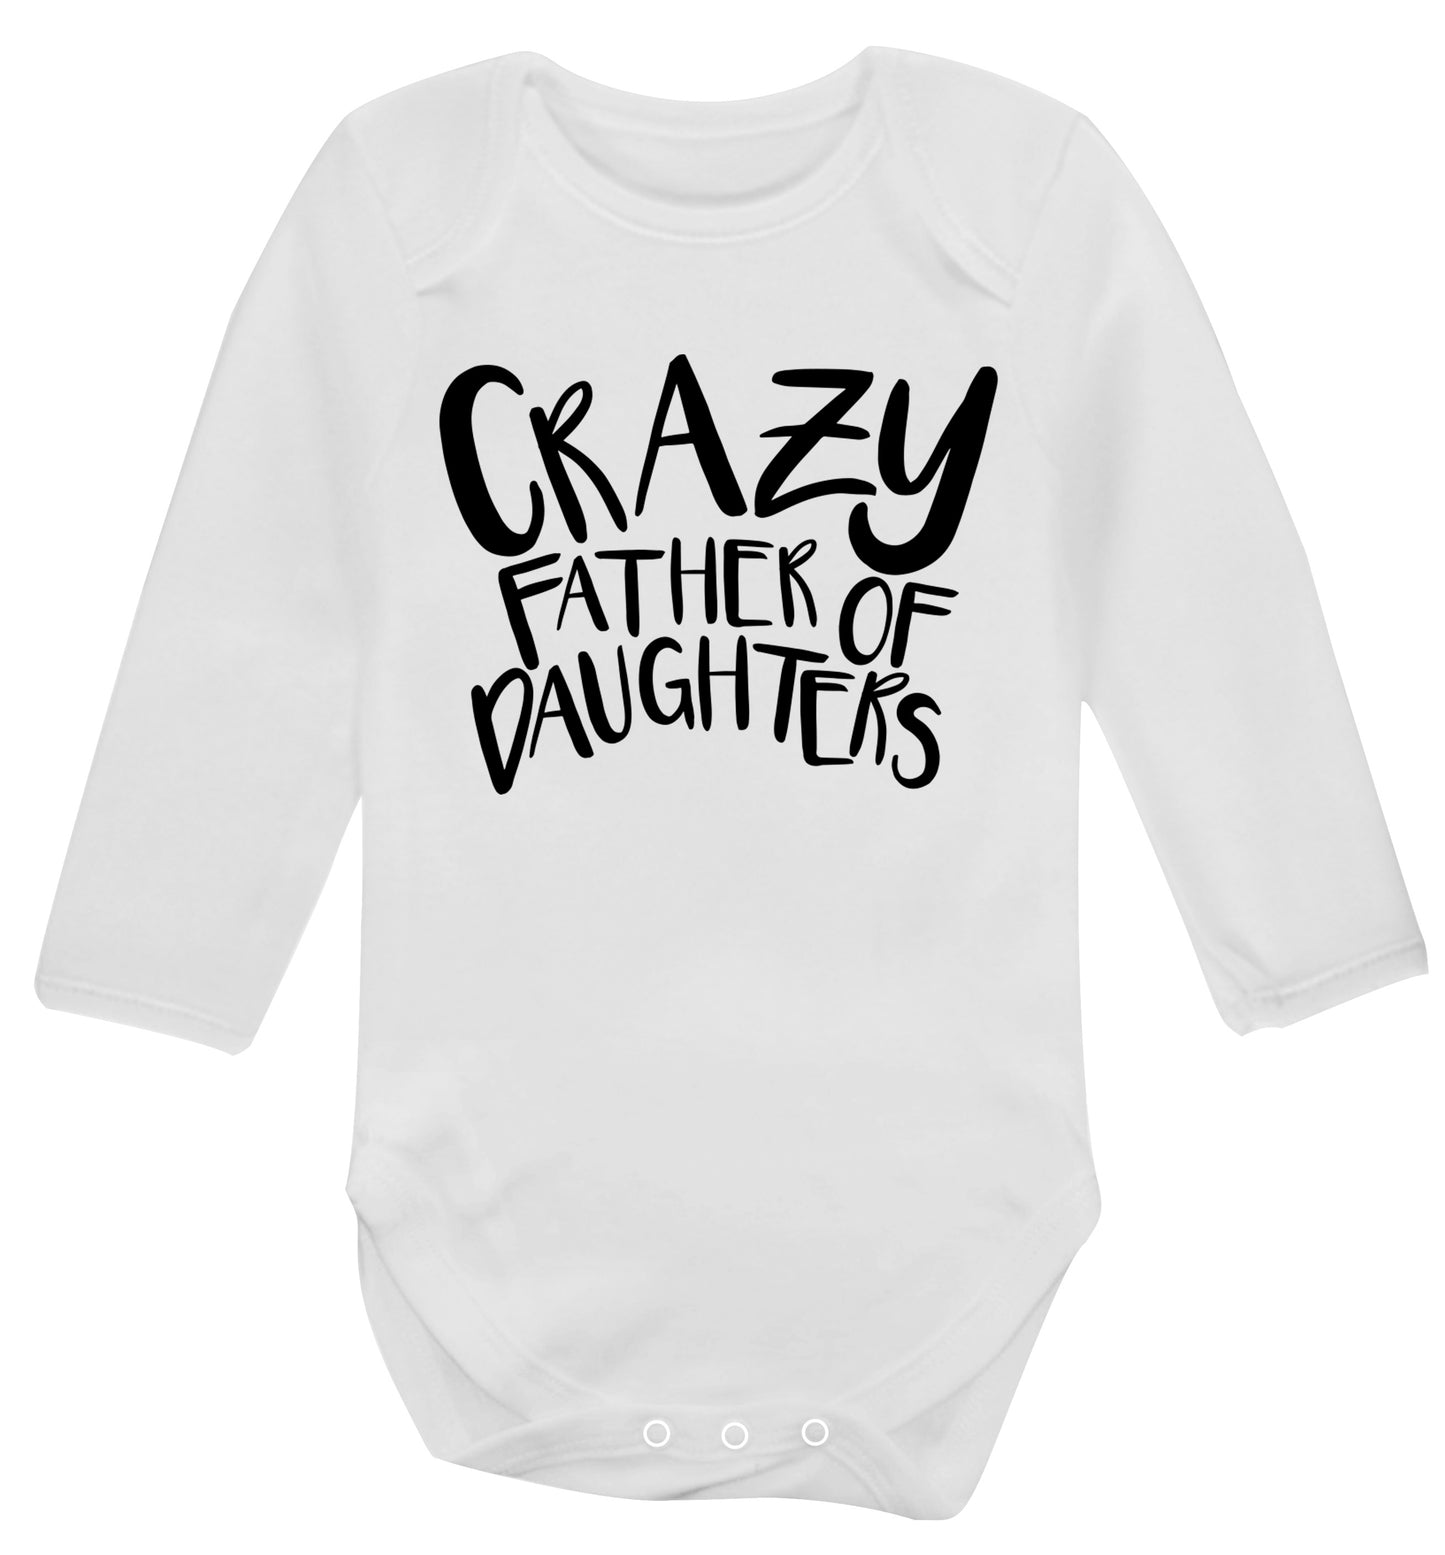 Crazy father of daughters Baby Vest long sleeved white 6-12 months